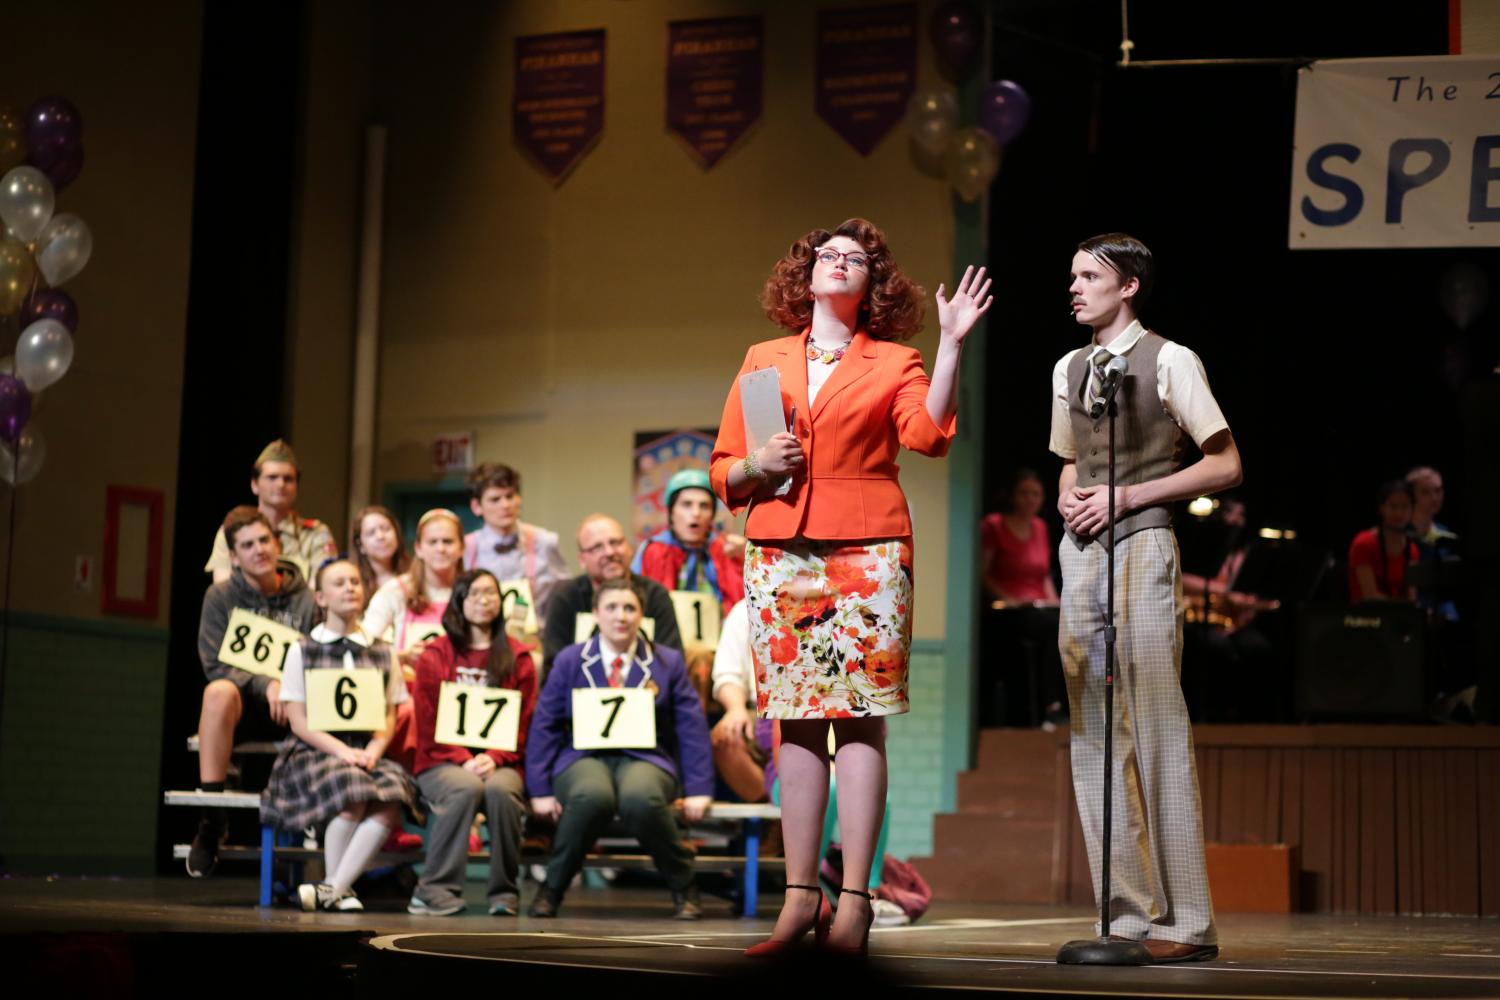 Mia Akers played Rona Peretti, the announcer and alumna of the Spelling Bee. She is seen with John Bleck, playing Douglas Panch, the school principal. 